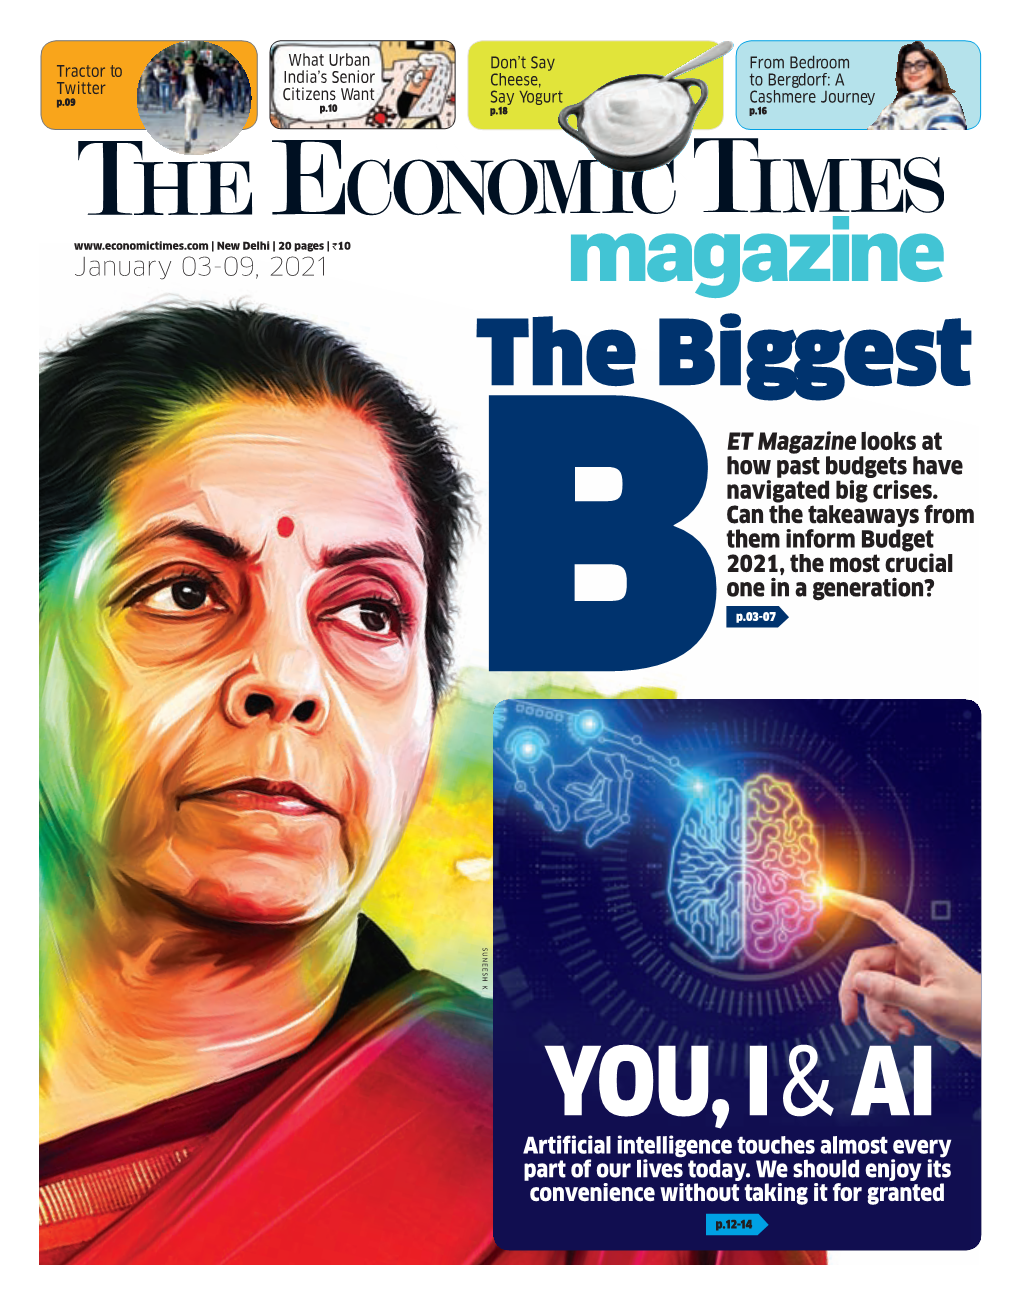 The Biggest ET Magazine Looks at How Past Budgets Have Navigated Big Crises